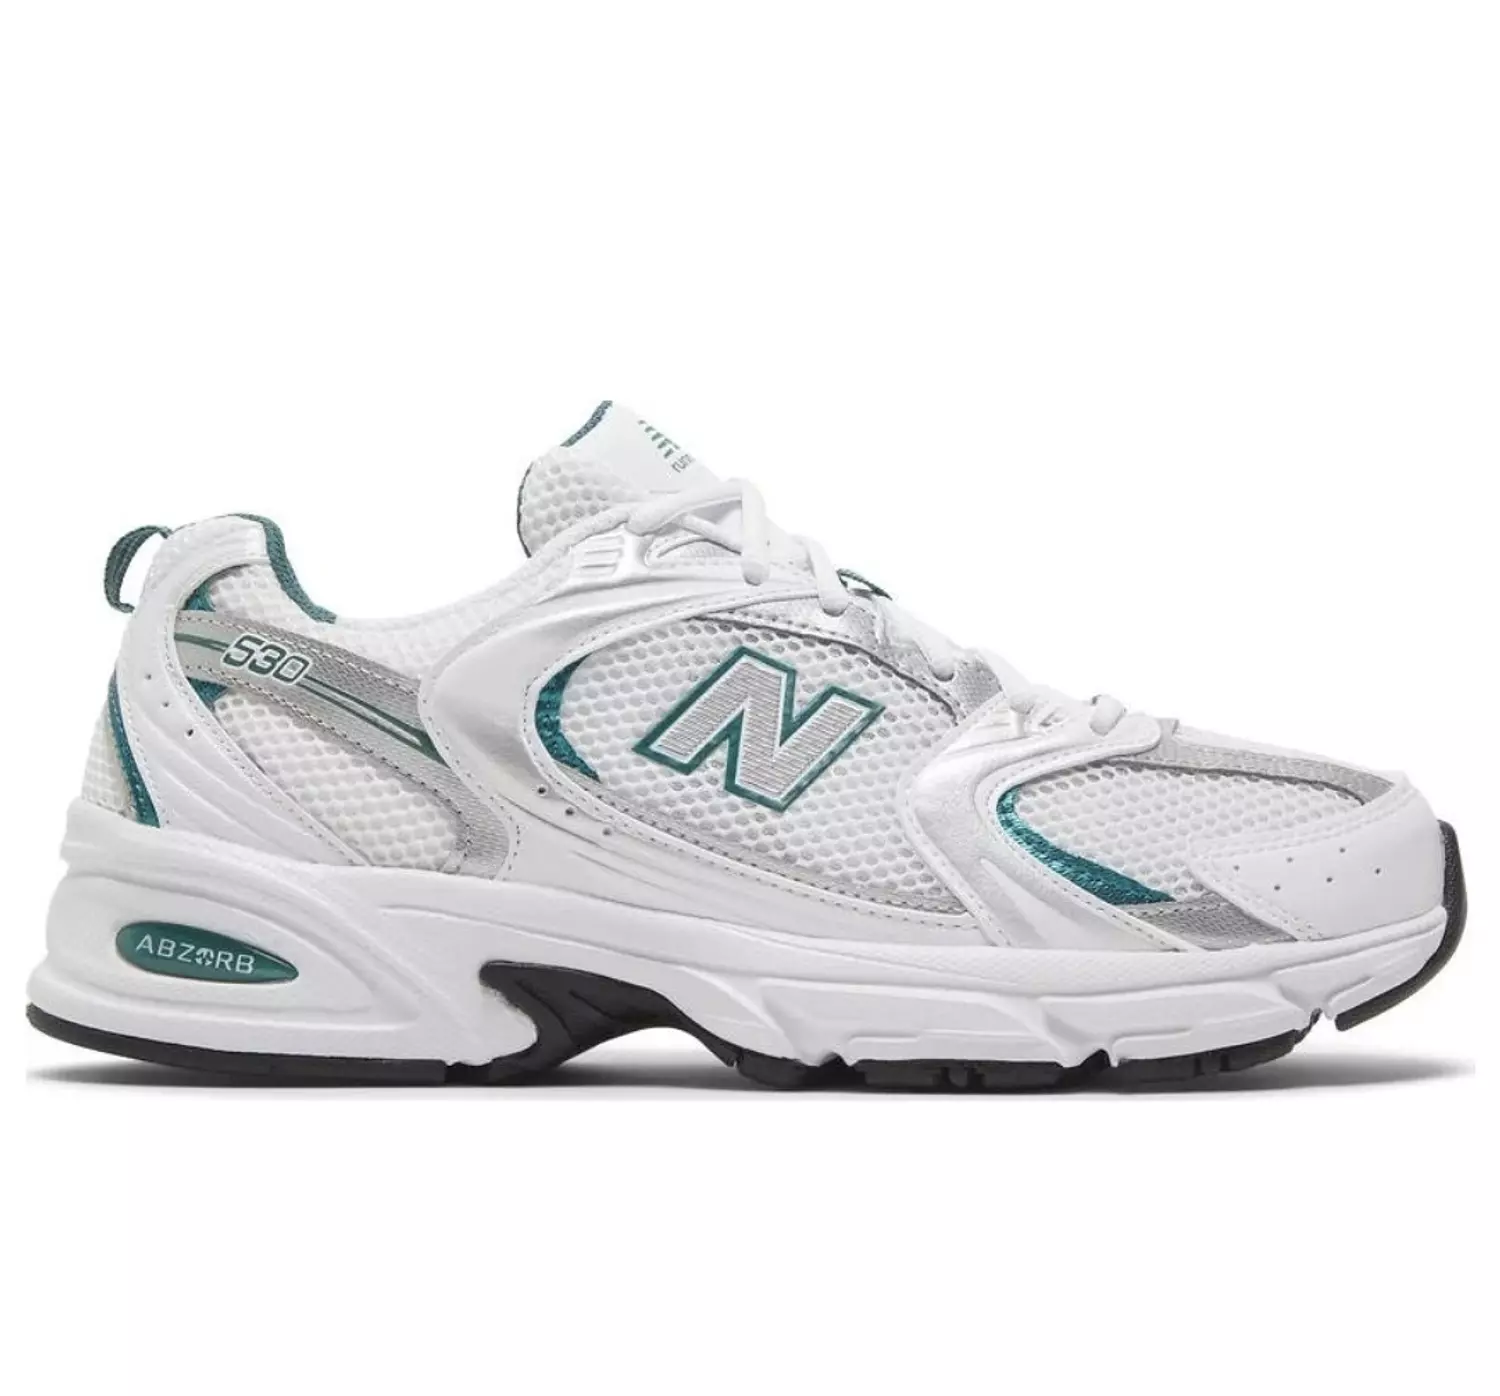 New Balance 530 'White Silver Green' hover image